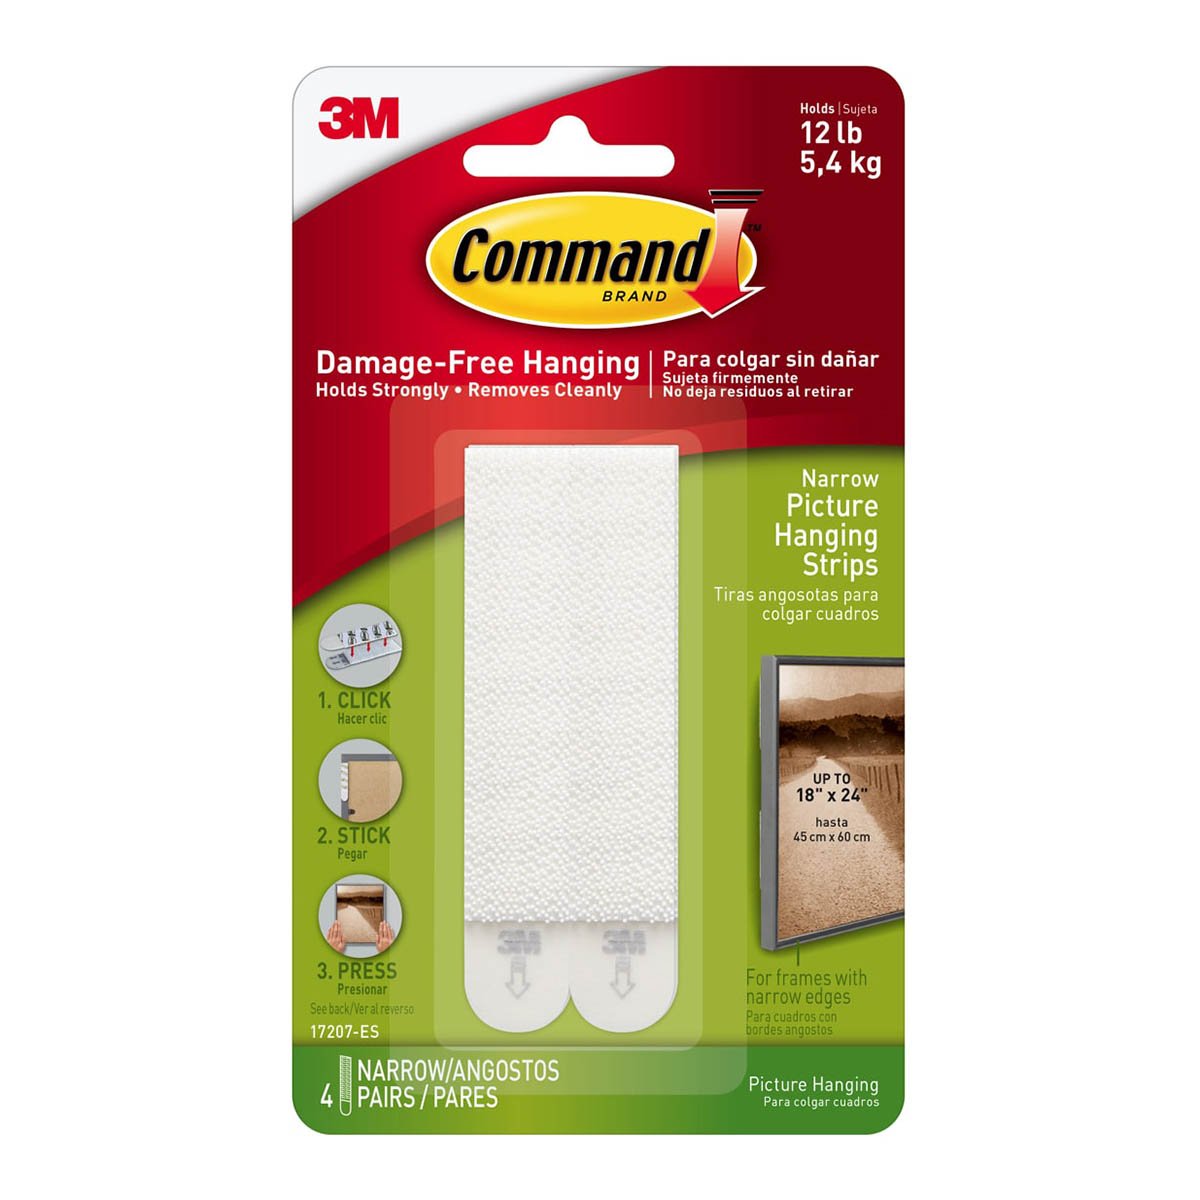 3M Command Narrow Picture Hanging Strips 4 Sets of Strips/1.35 Kg per Set